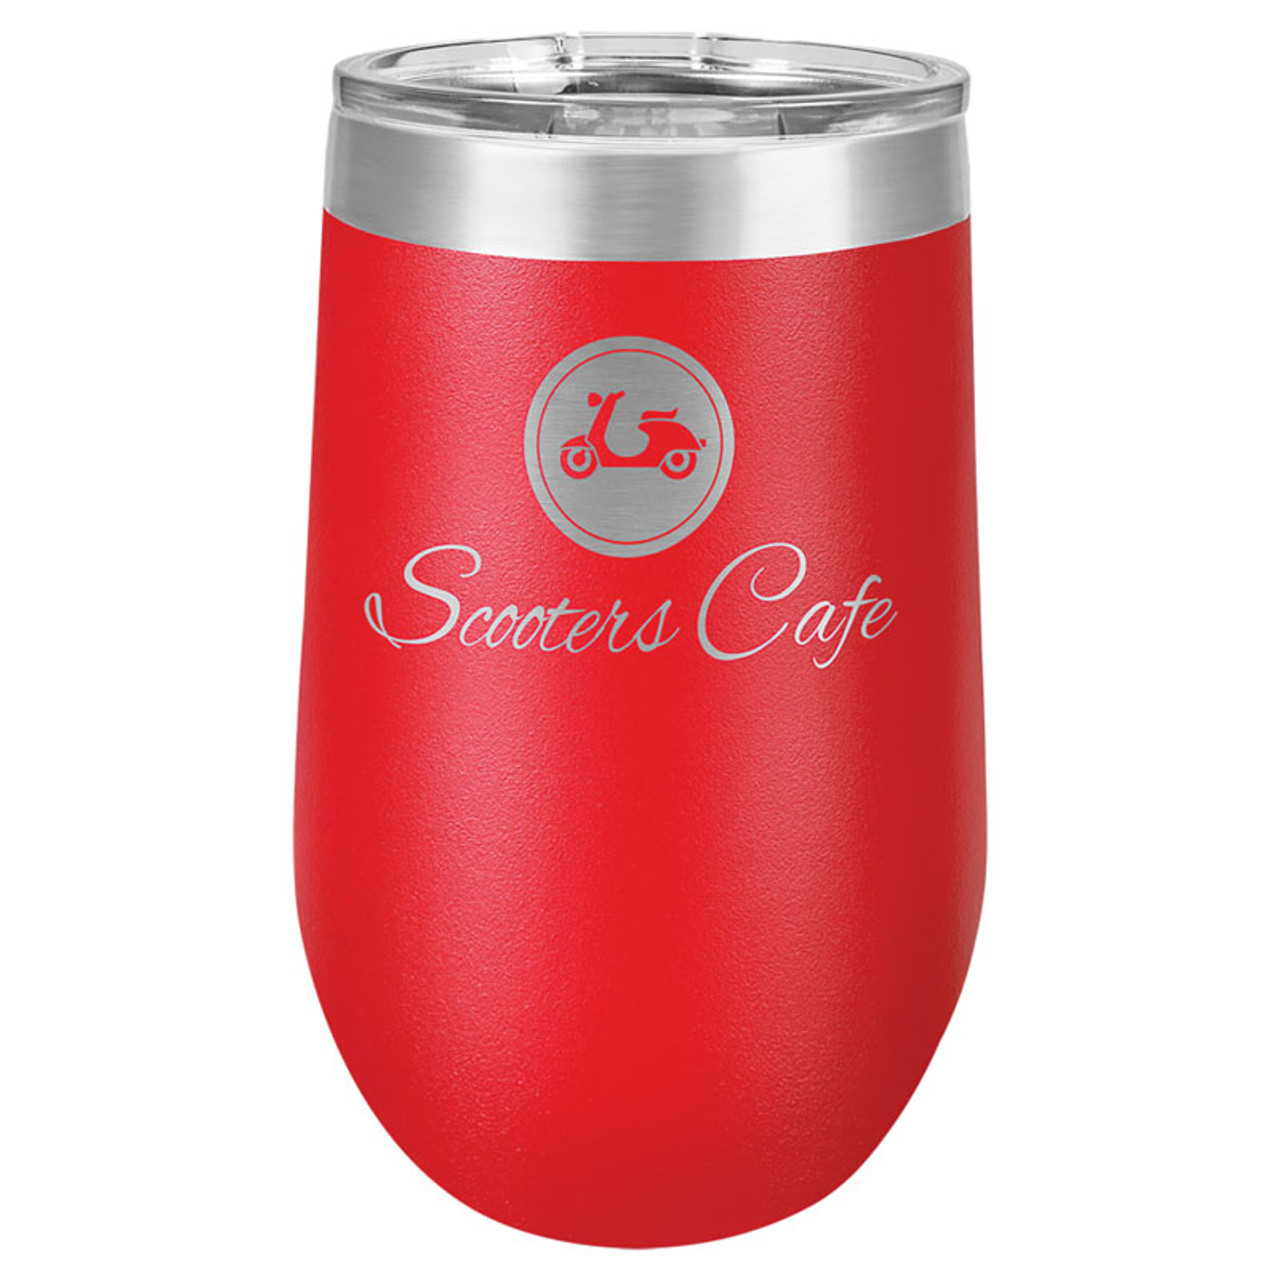 https://cdn11.bigcommerce.com/s-d22a0/images/stencil/1280x1280/products/2317/10280/personalized-tumblers-red-custom-engraved-polar-camel-16oz__03012.1545428425.jpg?c=2